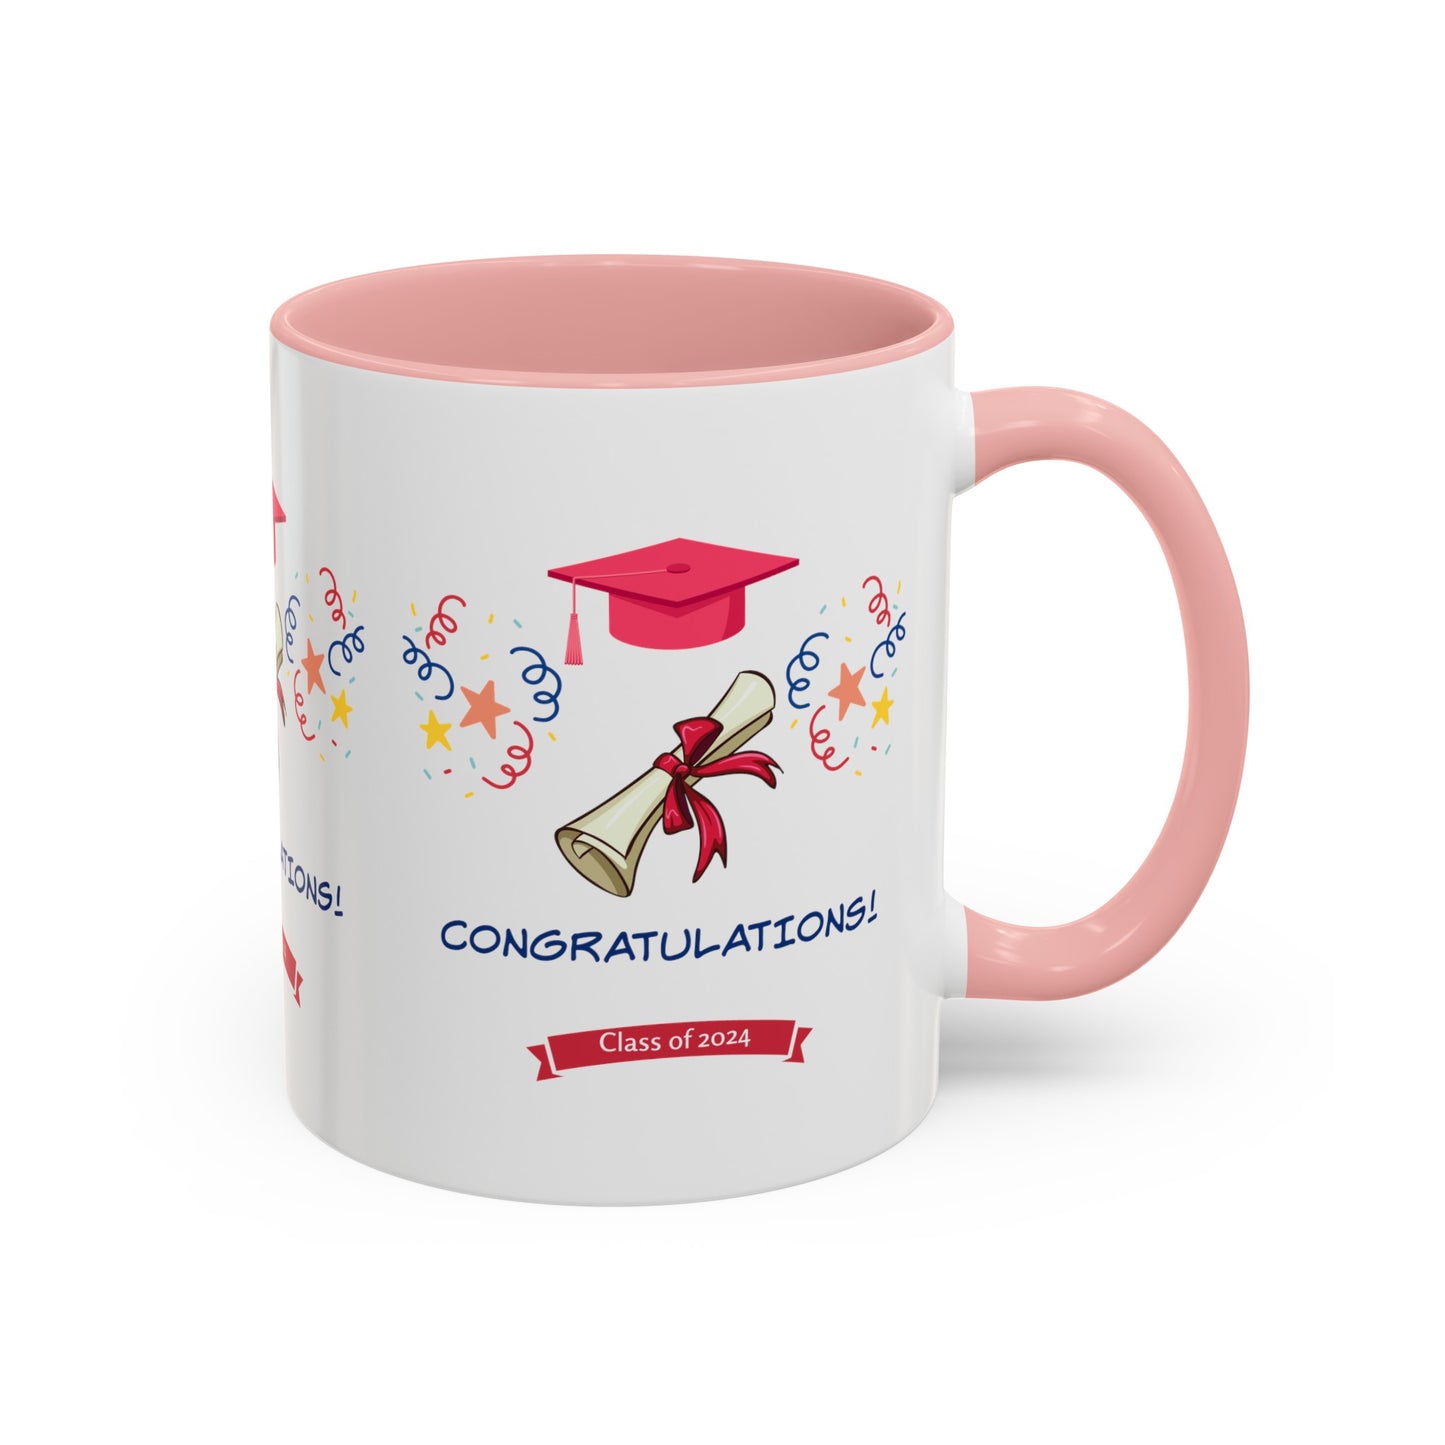 A white and pink 2024 Congratulations Mug: Graduation; 11 oz.; 2 Colors with graduation-themed graphics, including a cap, diploma, and stars, along with the text “CONGRATULATIONS! Class of 2024.” This American-made Printify mug is perfect for celebrating the achievements of any new graduate.